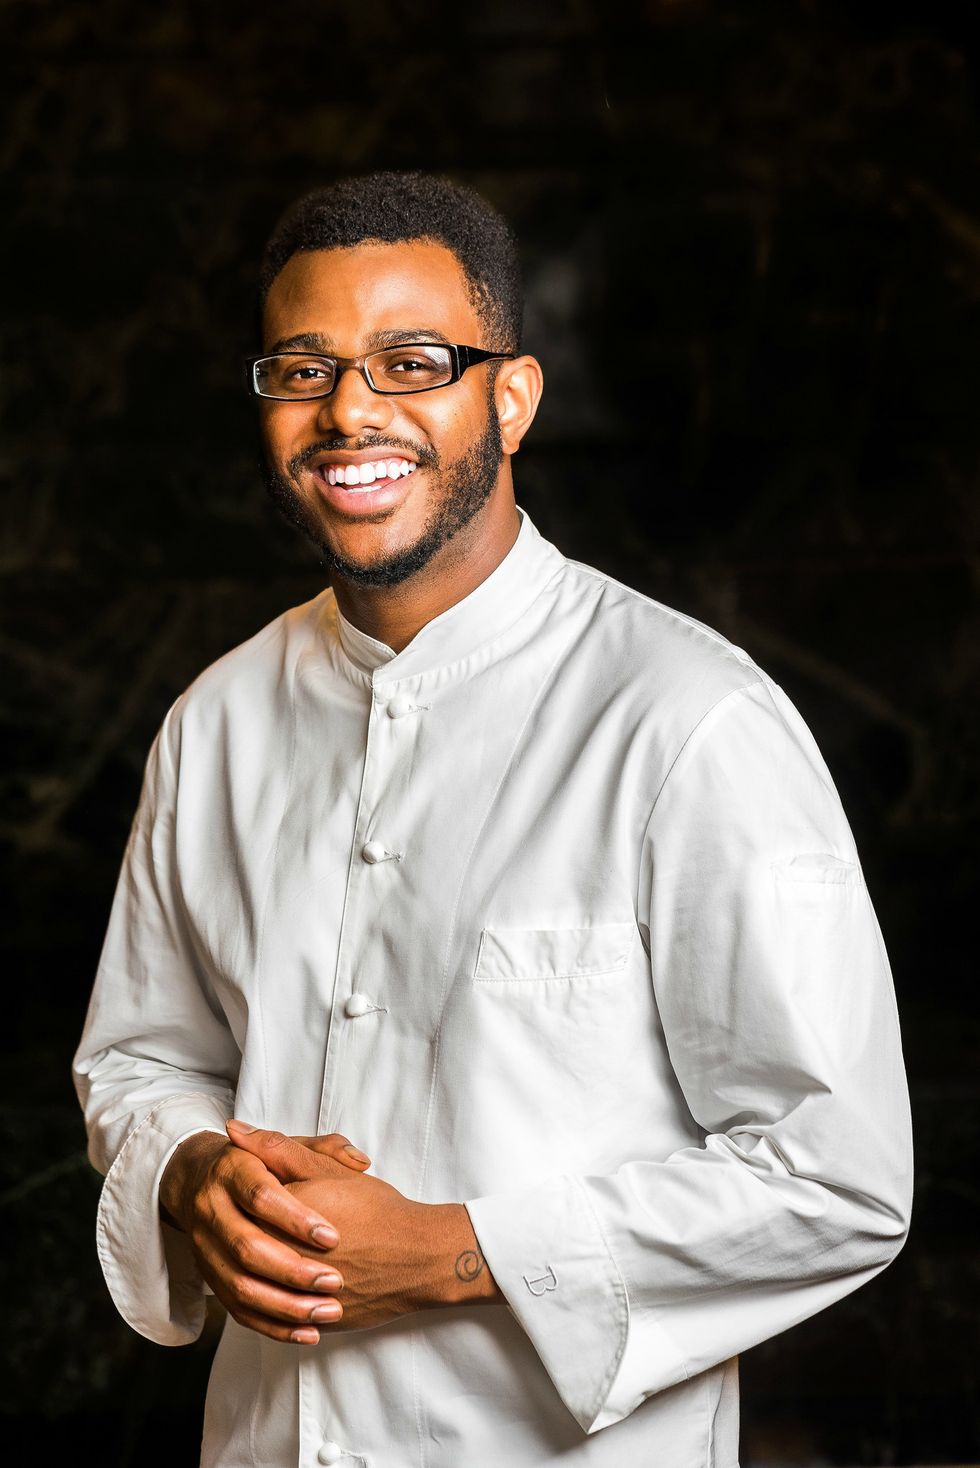 Chef Kwame Onwuachi Serves Up His West African & Caribbean History On A Plate